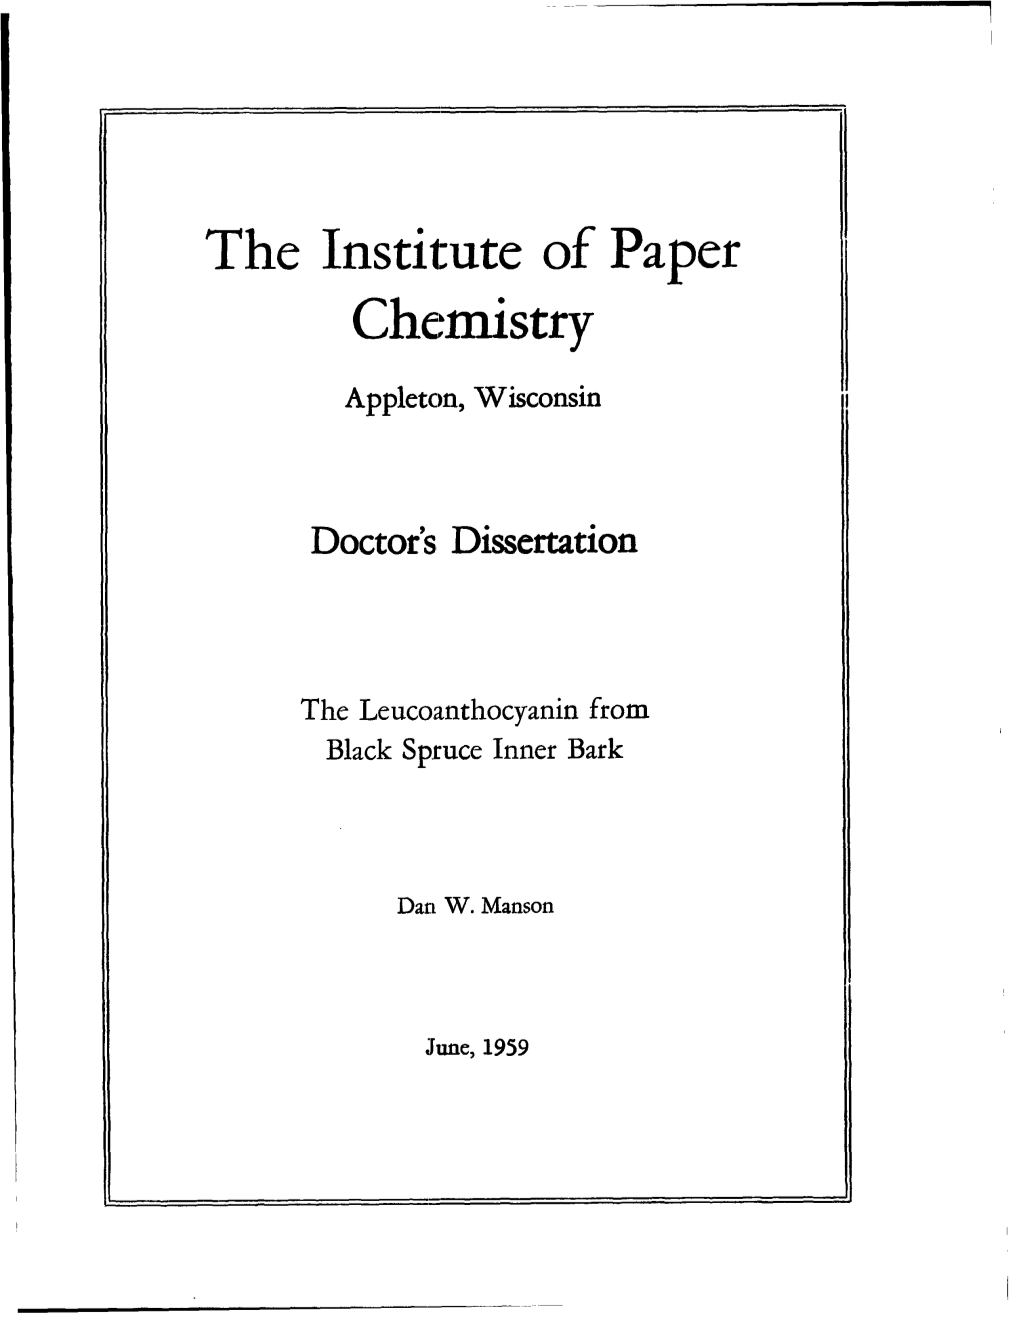 The Institute of Paper Chemistry for the Degree of Doctor of Philosophy from Lawrence College, Appleton, Wisconsin